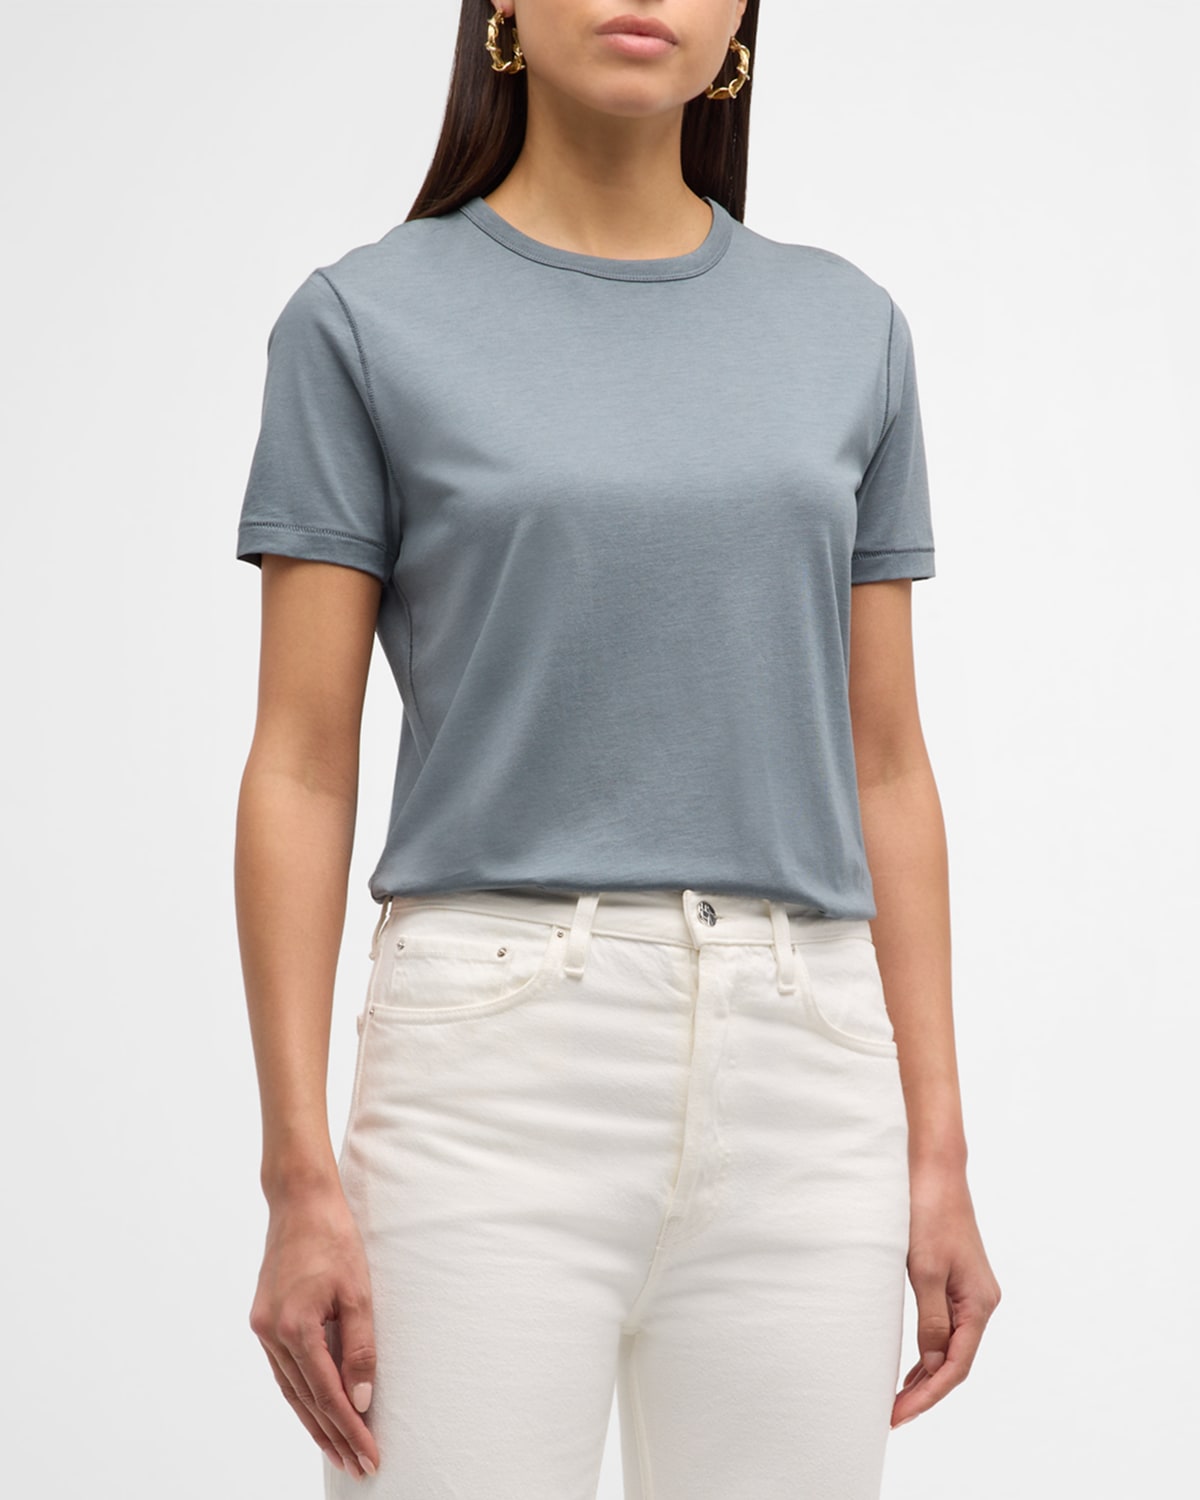 Majestic Lyocell Cotton Semi-relaxed Short-sleeve Crewneck Tee In Blue/gray